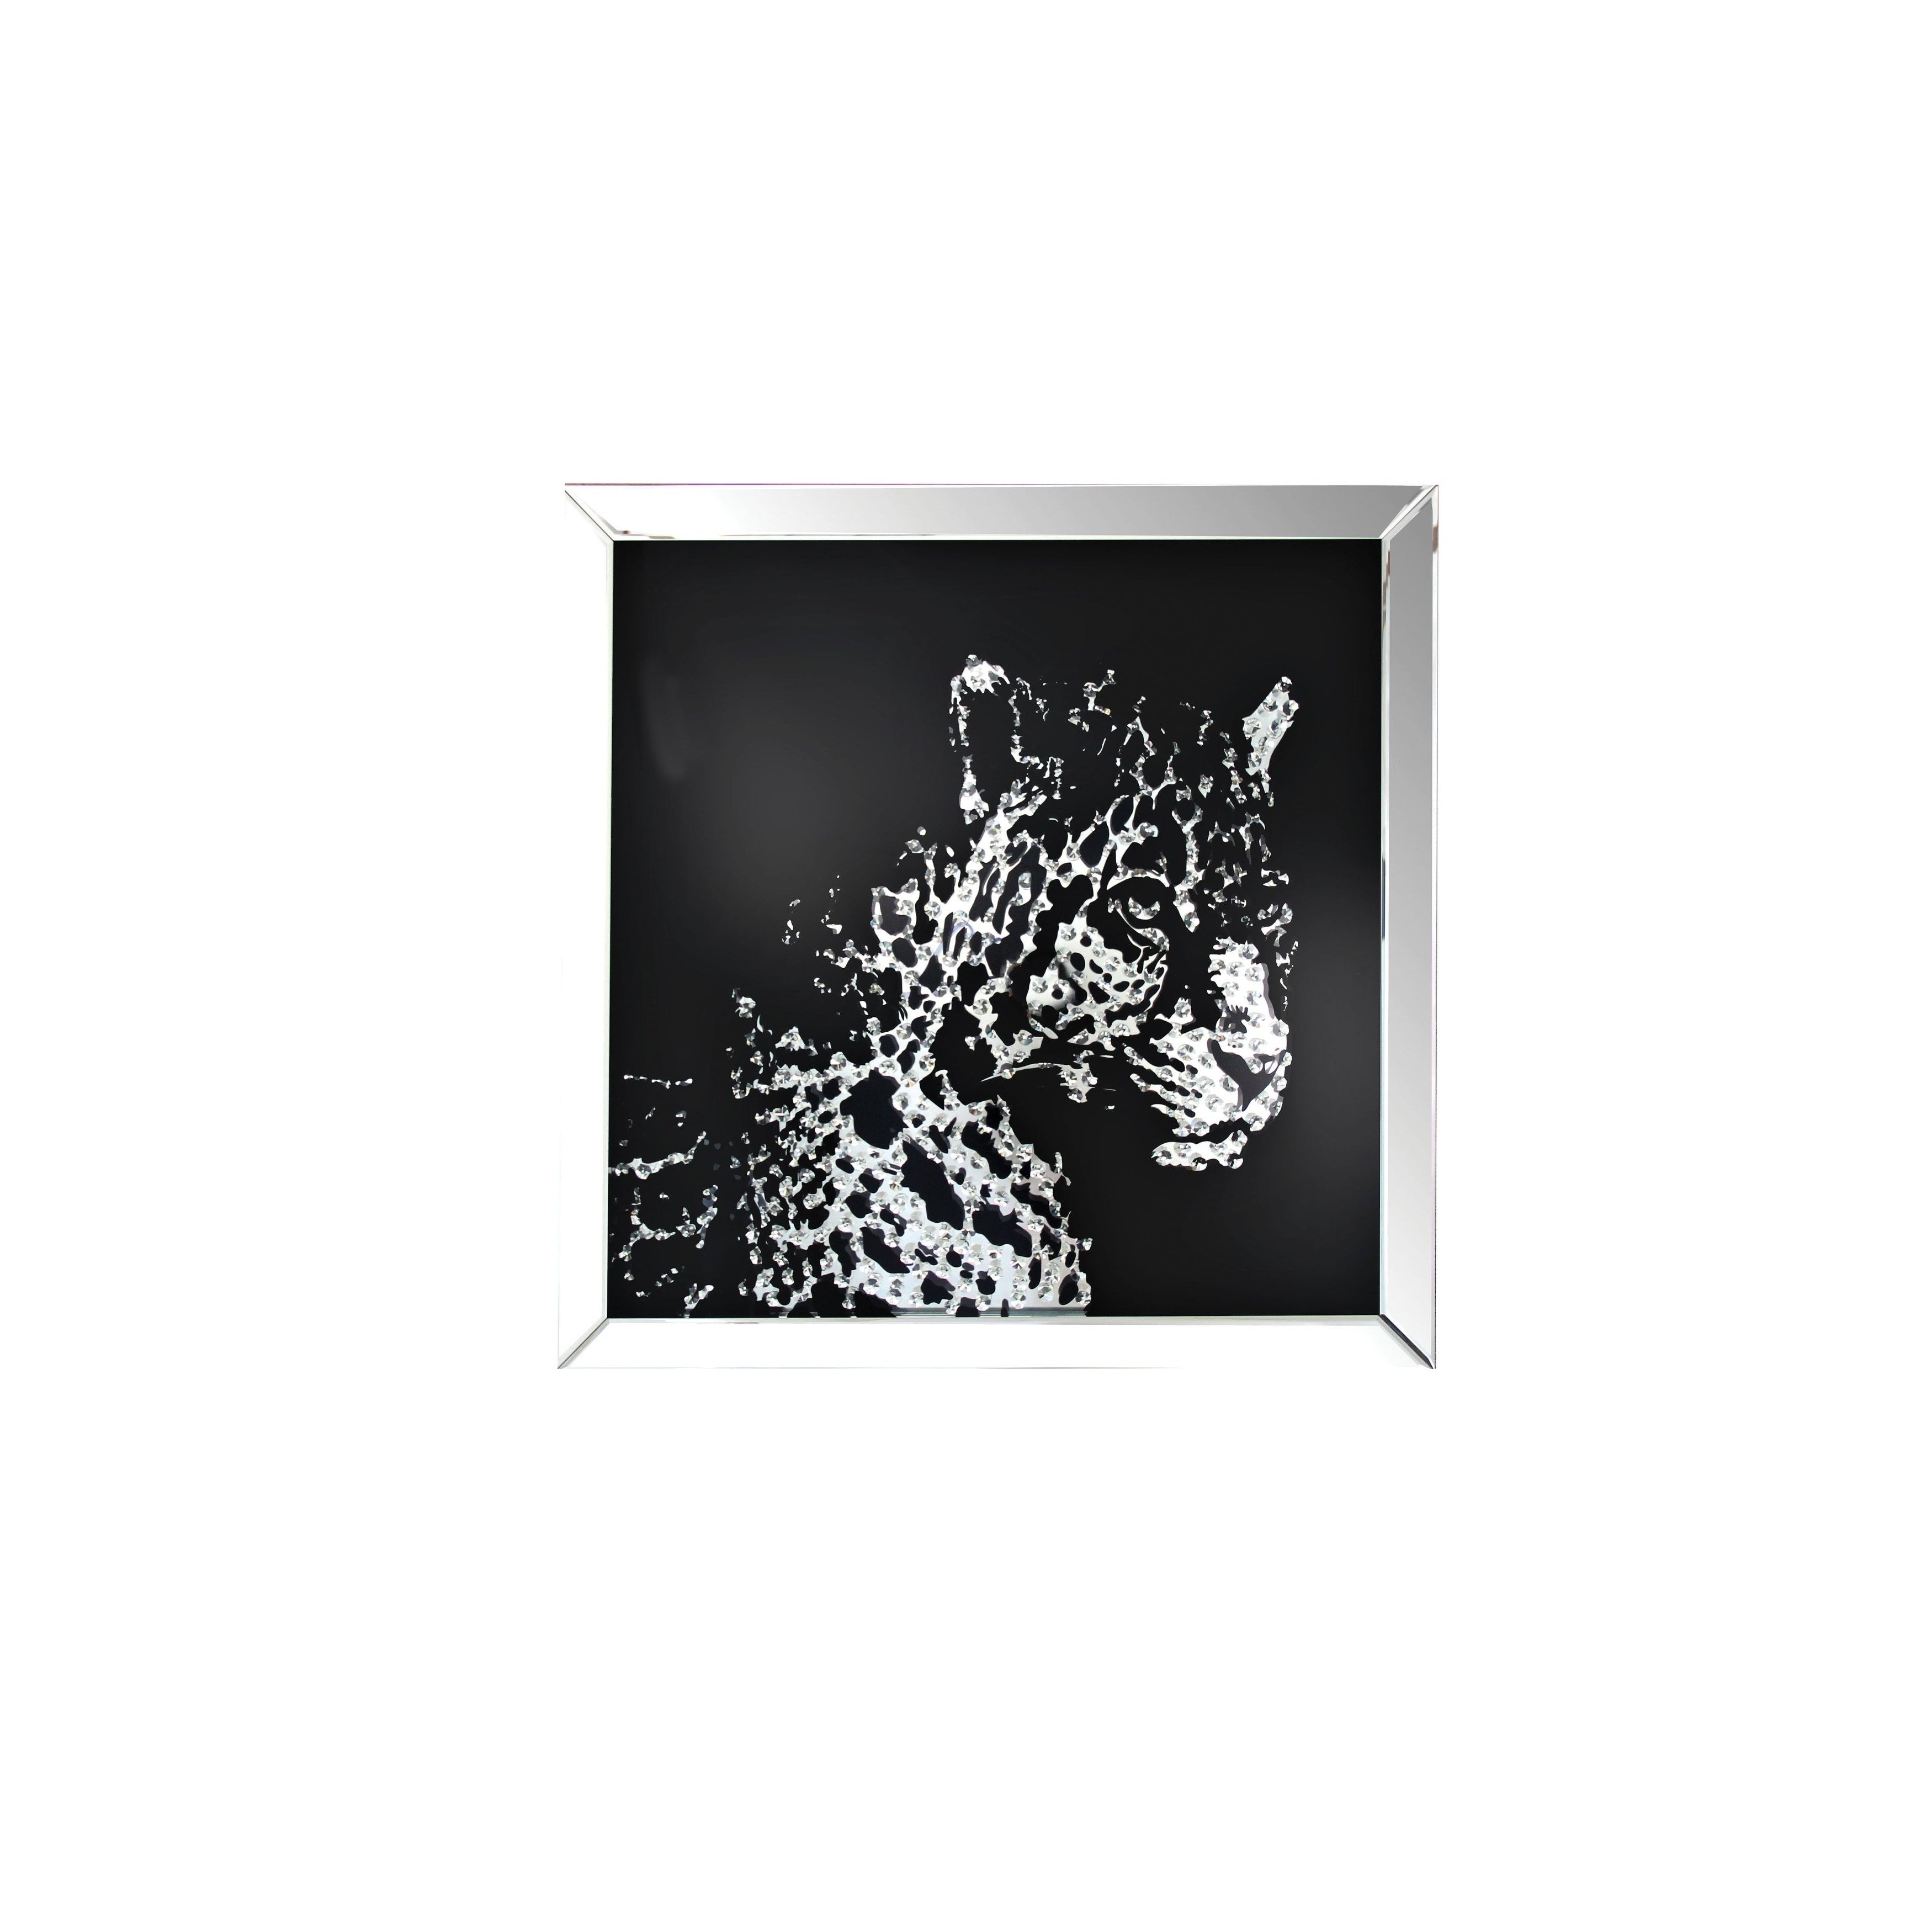 Square Shape Mirror Framed Leopard Wall Dï¿½cor With Crystal Inlays, Black  & Silver For Most Up To Date Leopard Wall Mirrors (Photo 8 of 20)